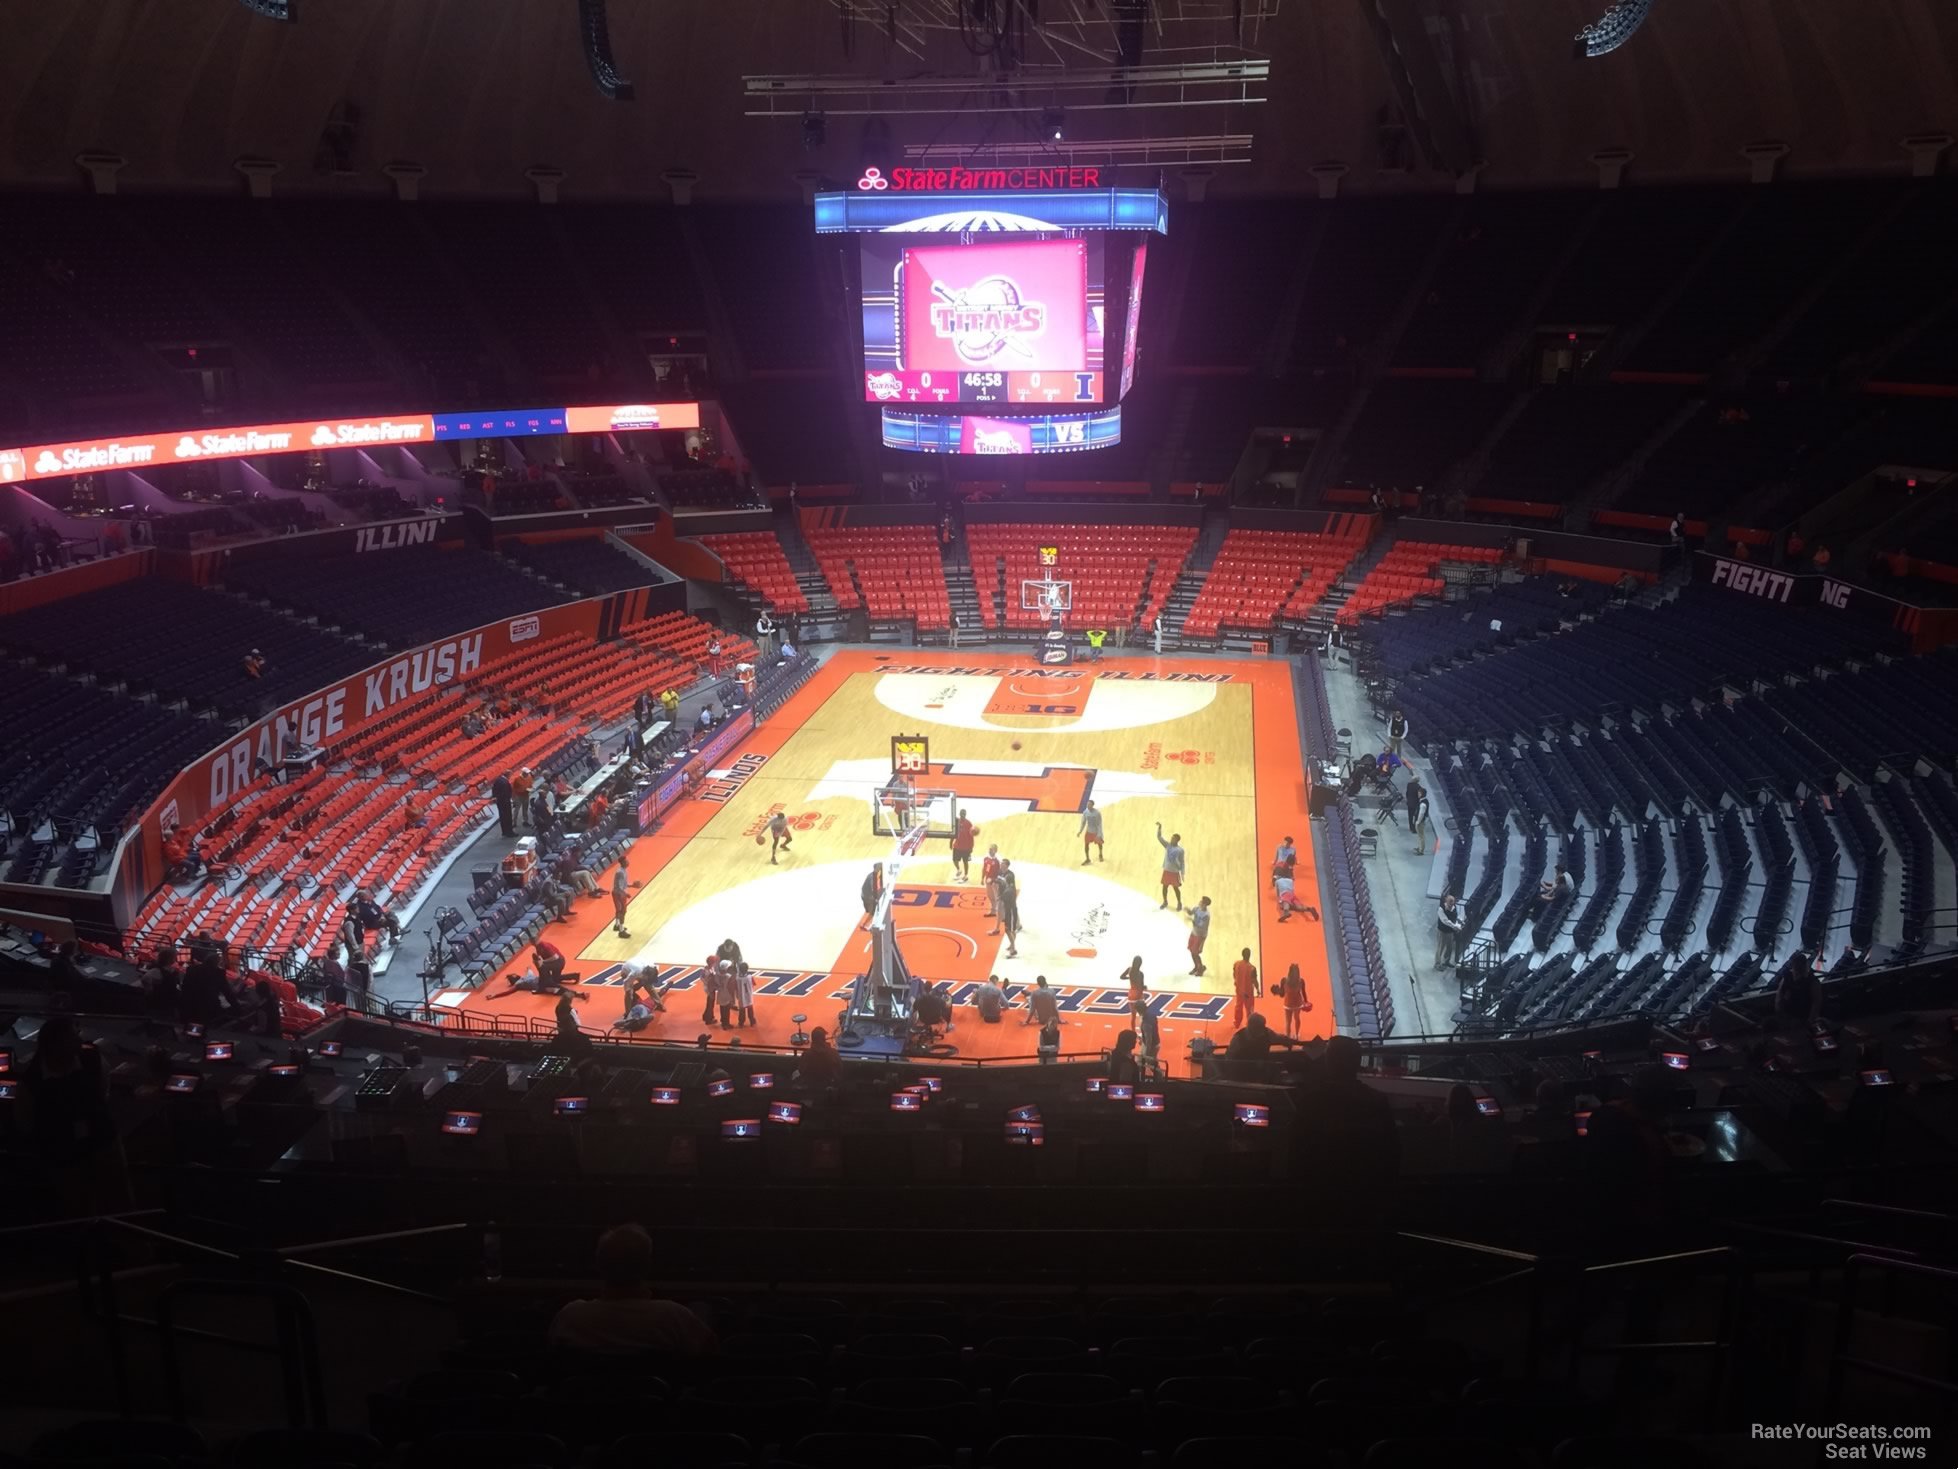 section 212, row 10 seat view  - state farm center